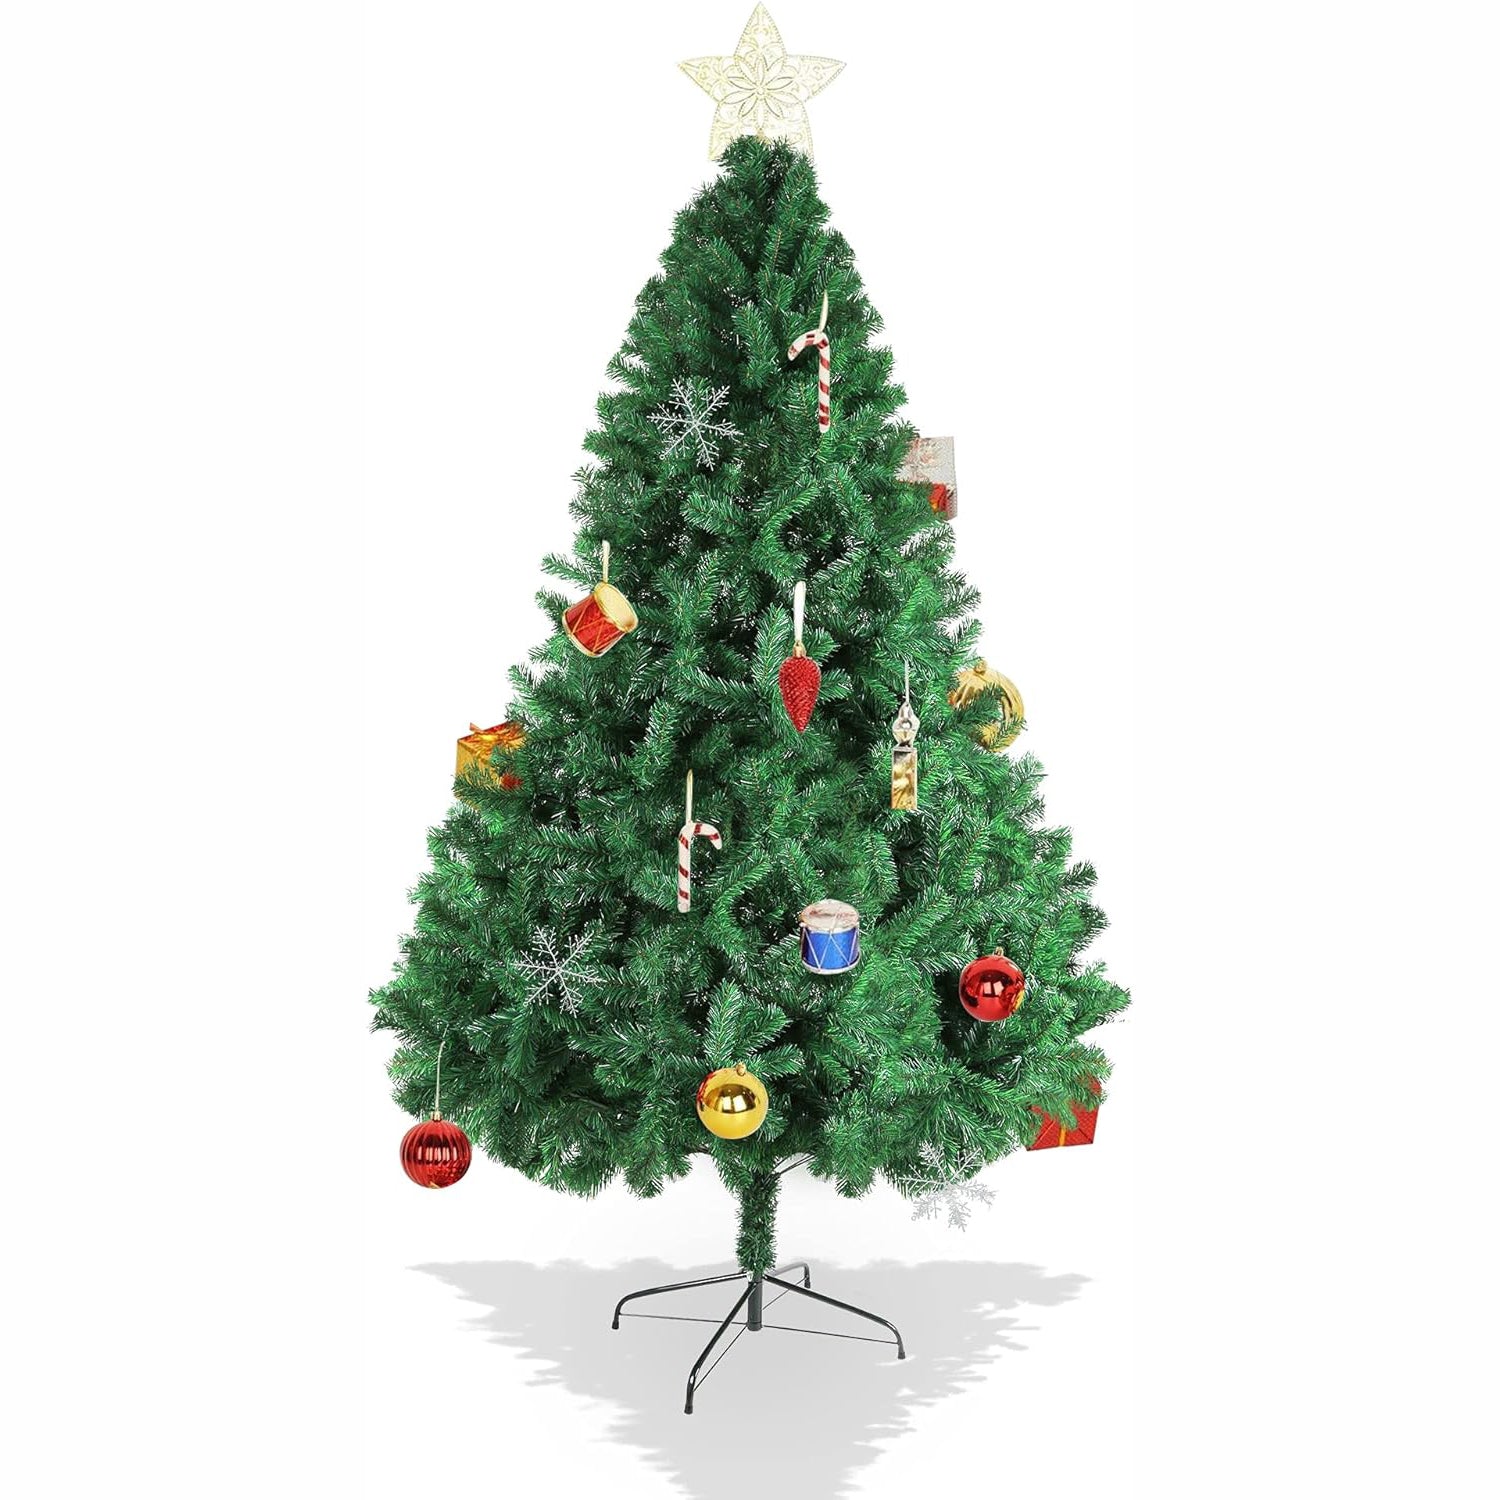 7ft Christmas Pine Tree Artificial Xmas Tree with 1000 Branch Tips and Decoration, Green